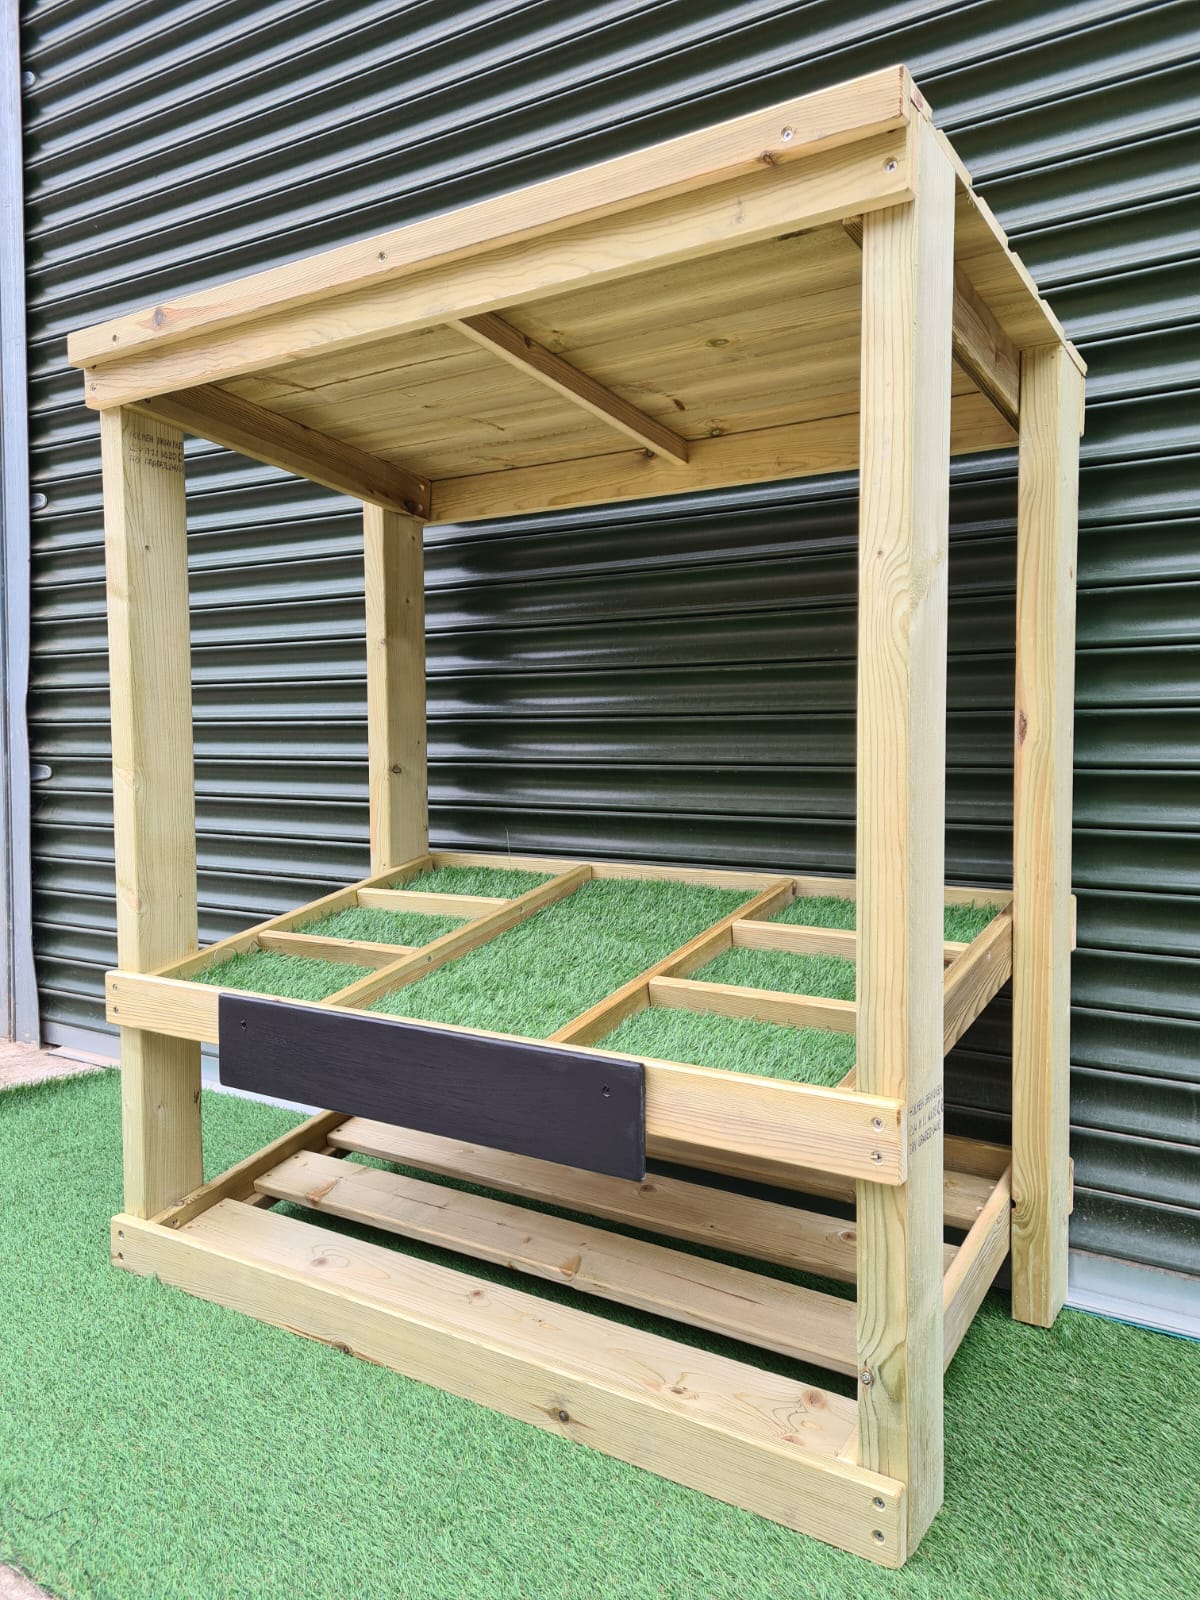 Market Stall Outdoor Equipment | Learning and Exploring Through Play